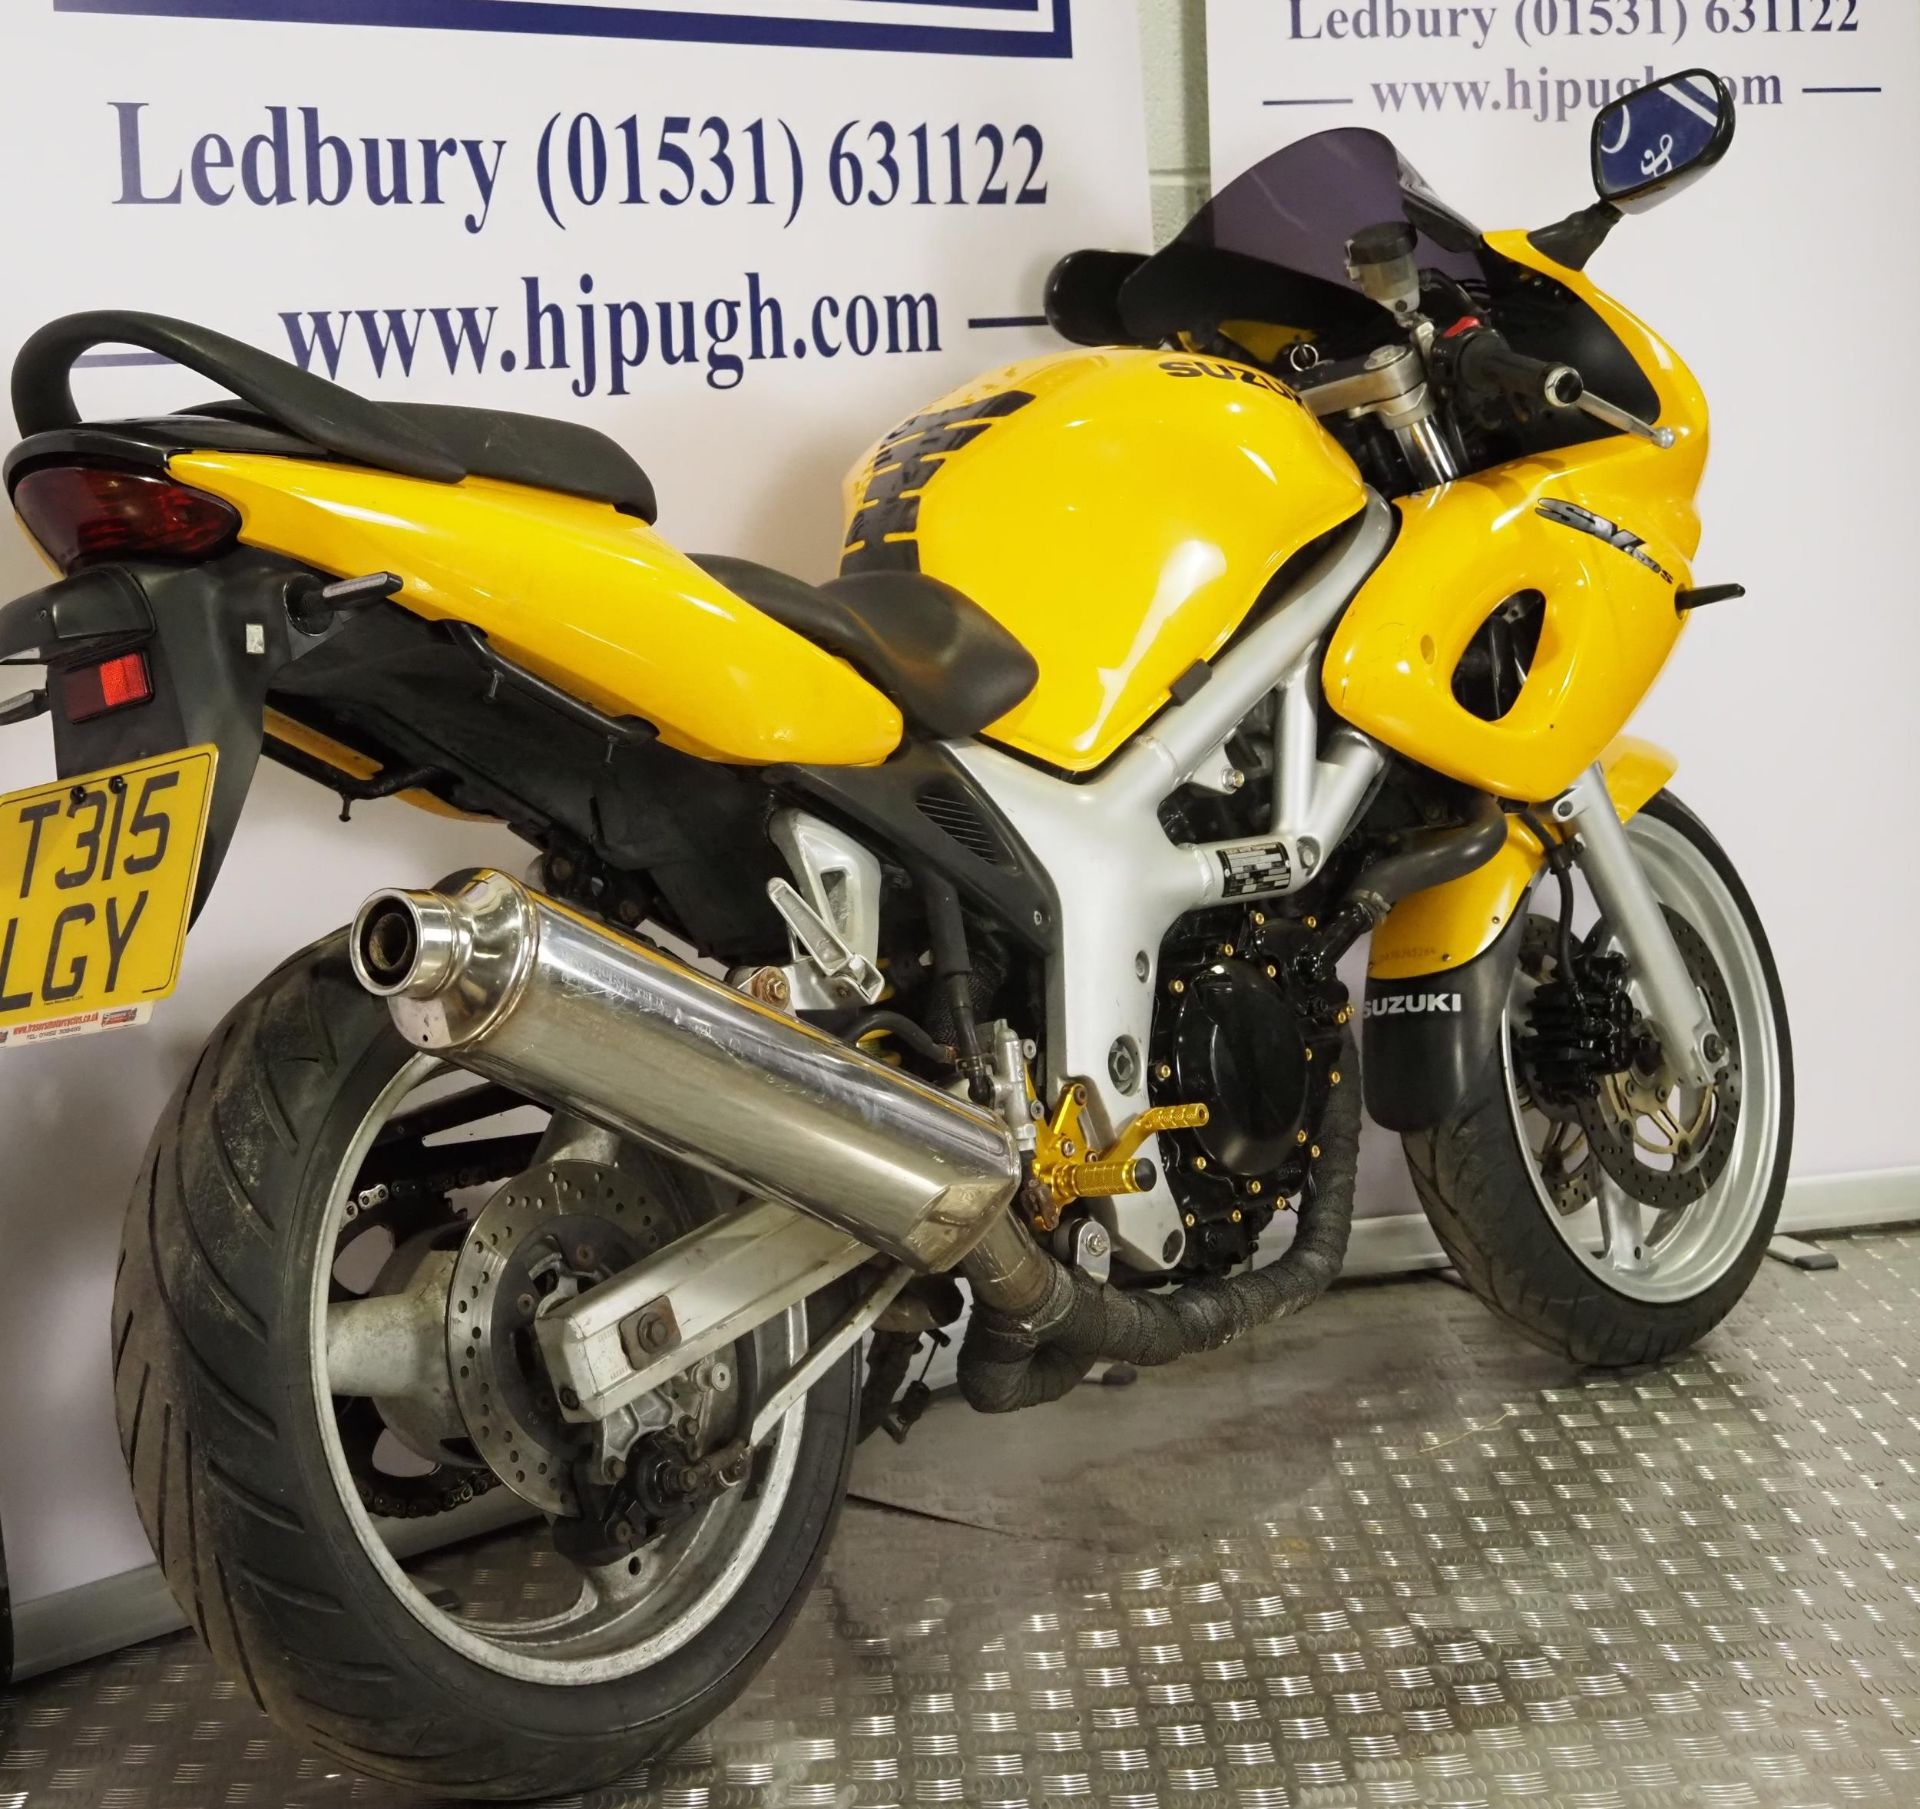 Suzuki SV650 motorcycle. 1999. 645cc Recently serviced with new oil, filter and starter motor but - Image 3 of 6